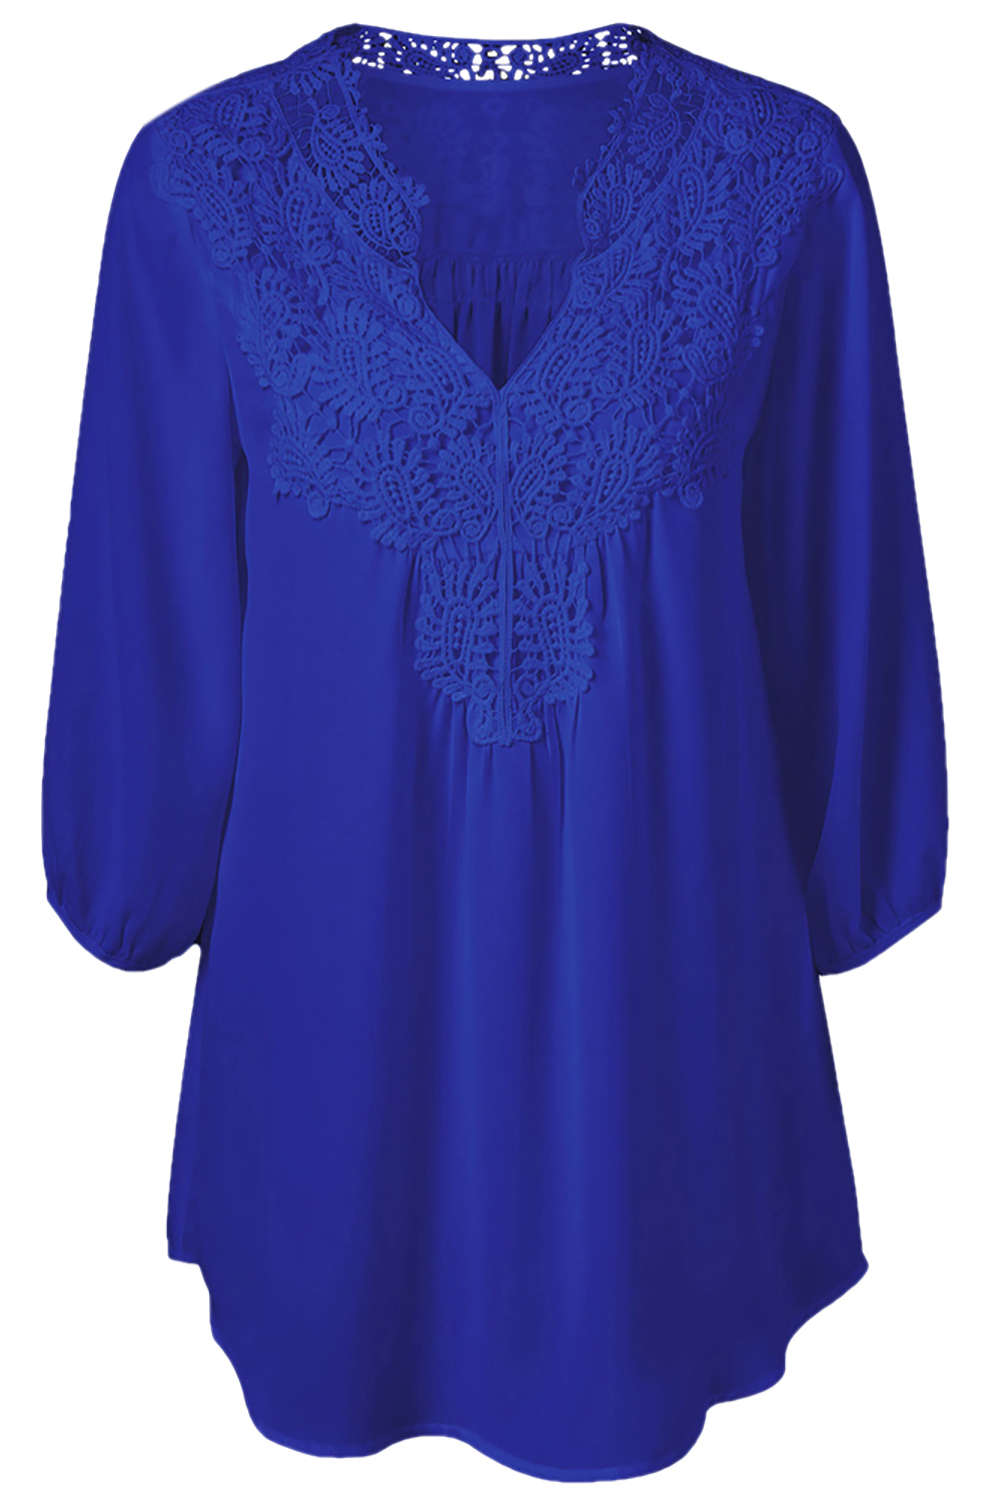 Iyasson Women's Stand Collar Lace Plus Size Tunic Blouse